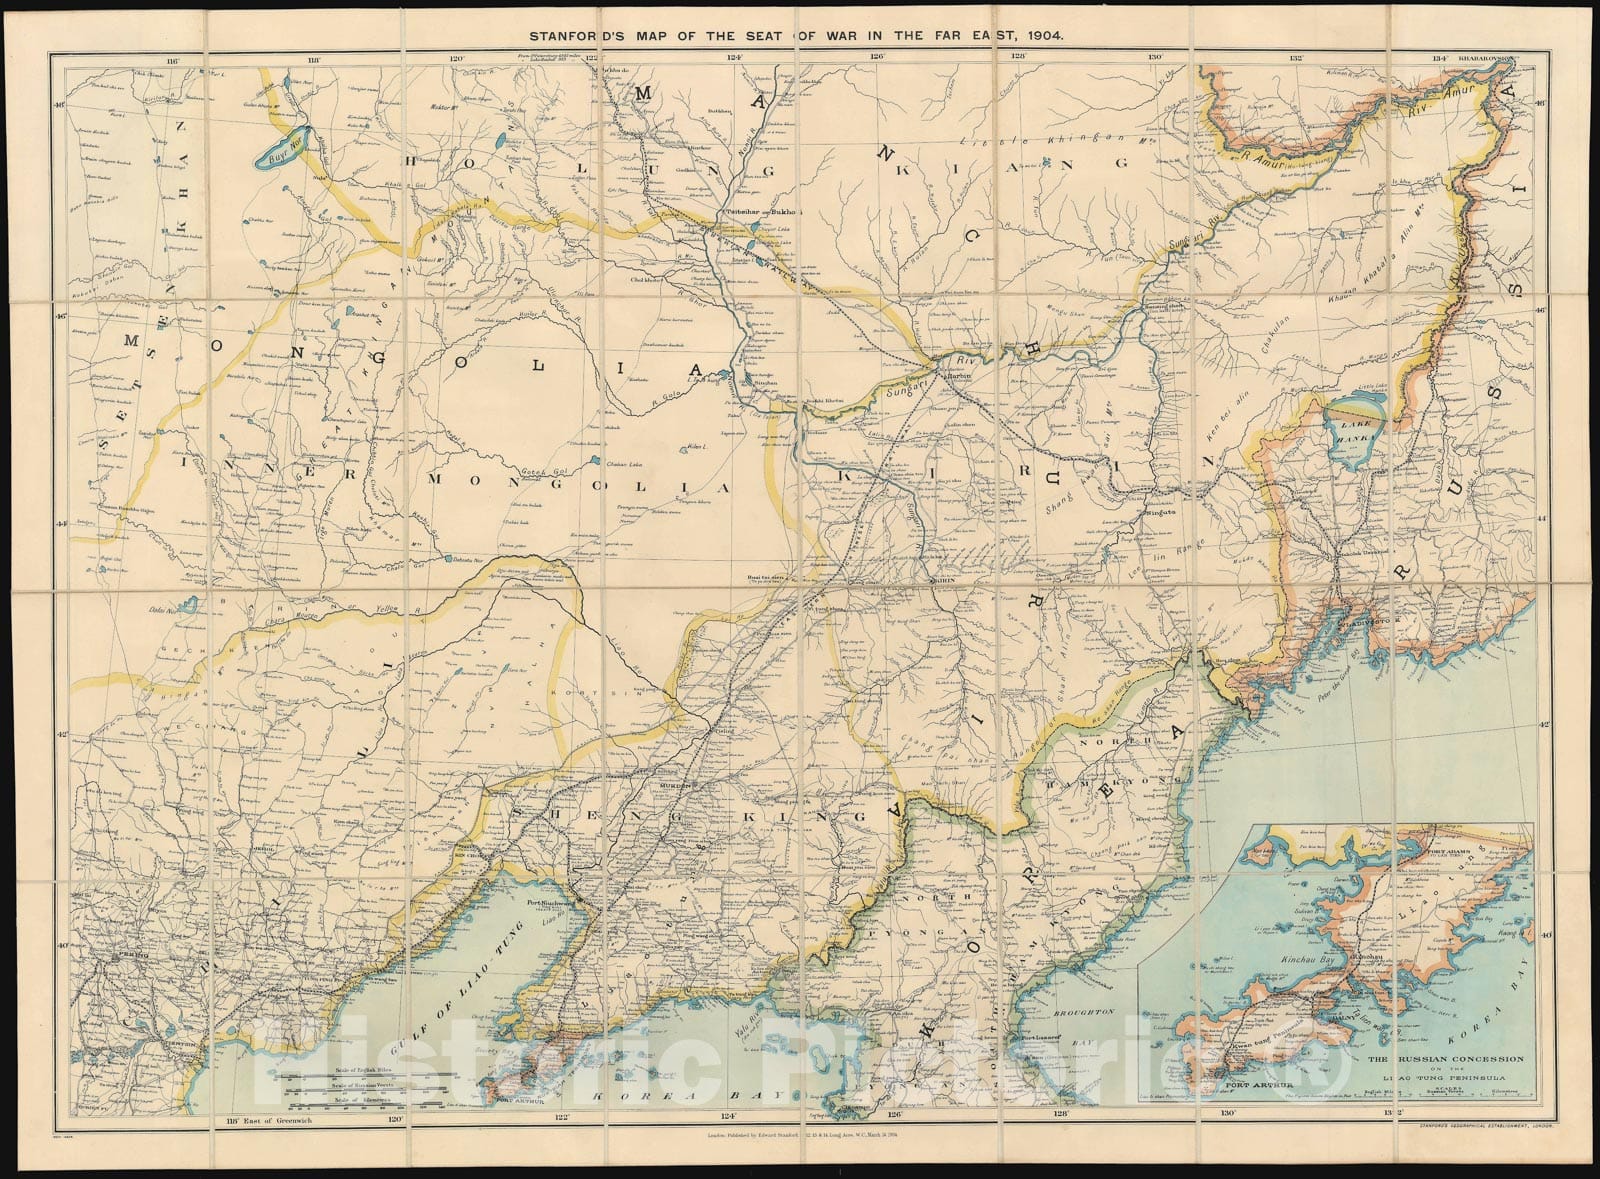 Historic Map : Manchuria and China "Russo-Japanese War", Stanford, 1904, Vintage Wall Art